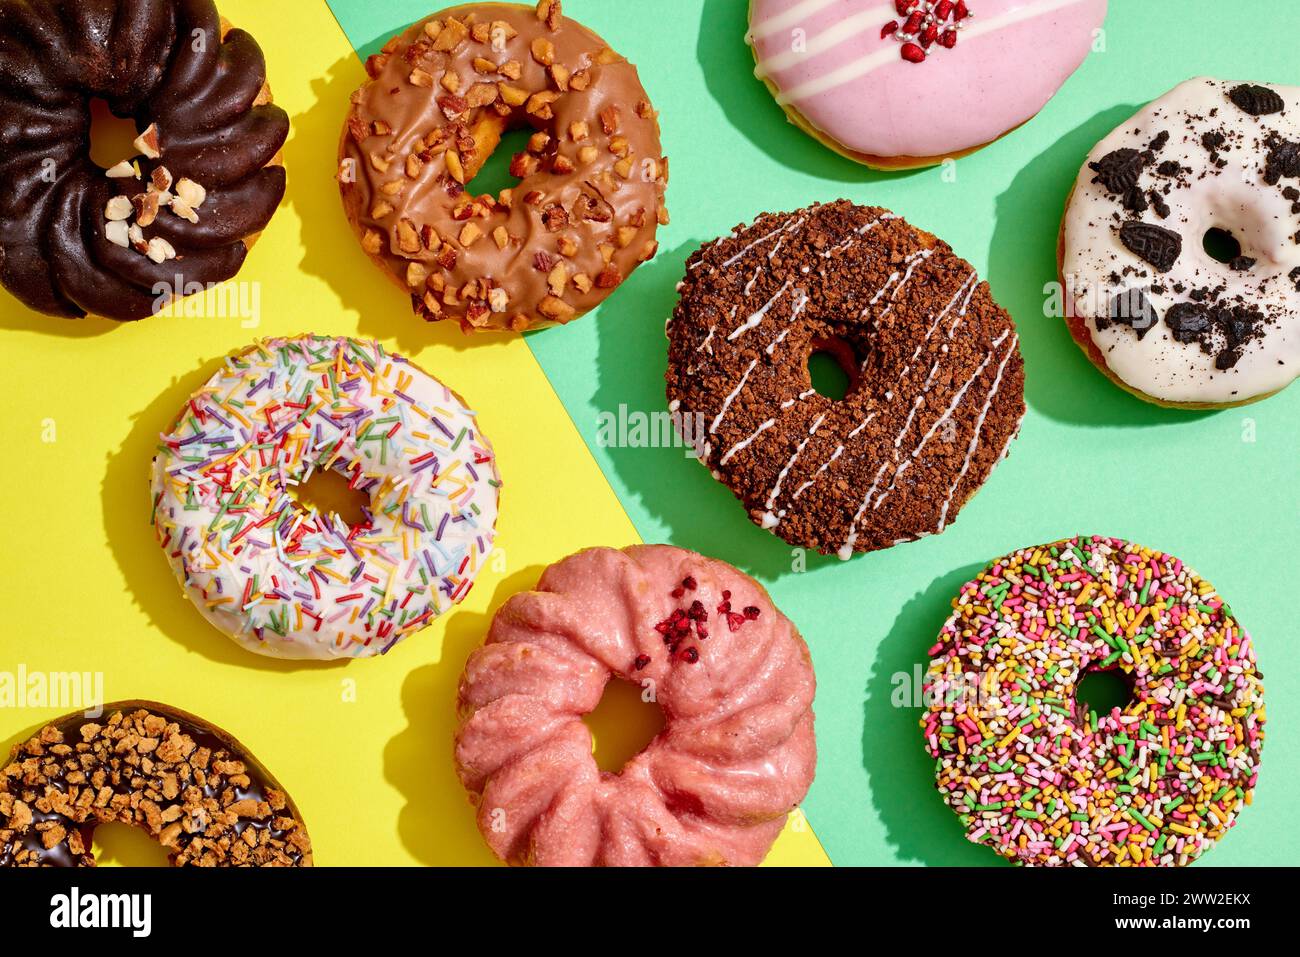 Donuts on a yellow and green background Stock Photo